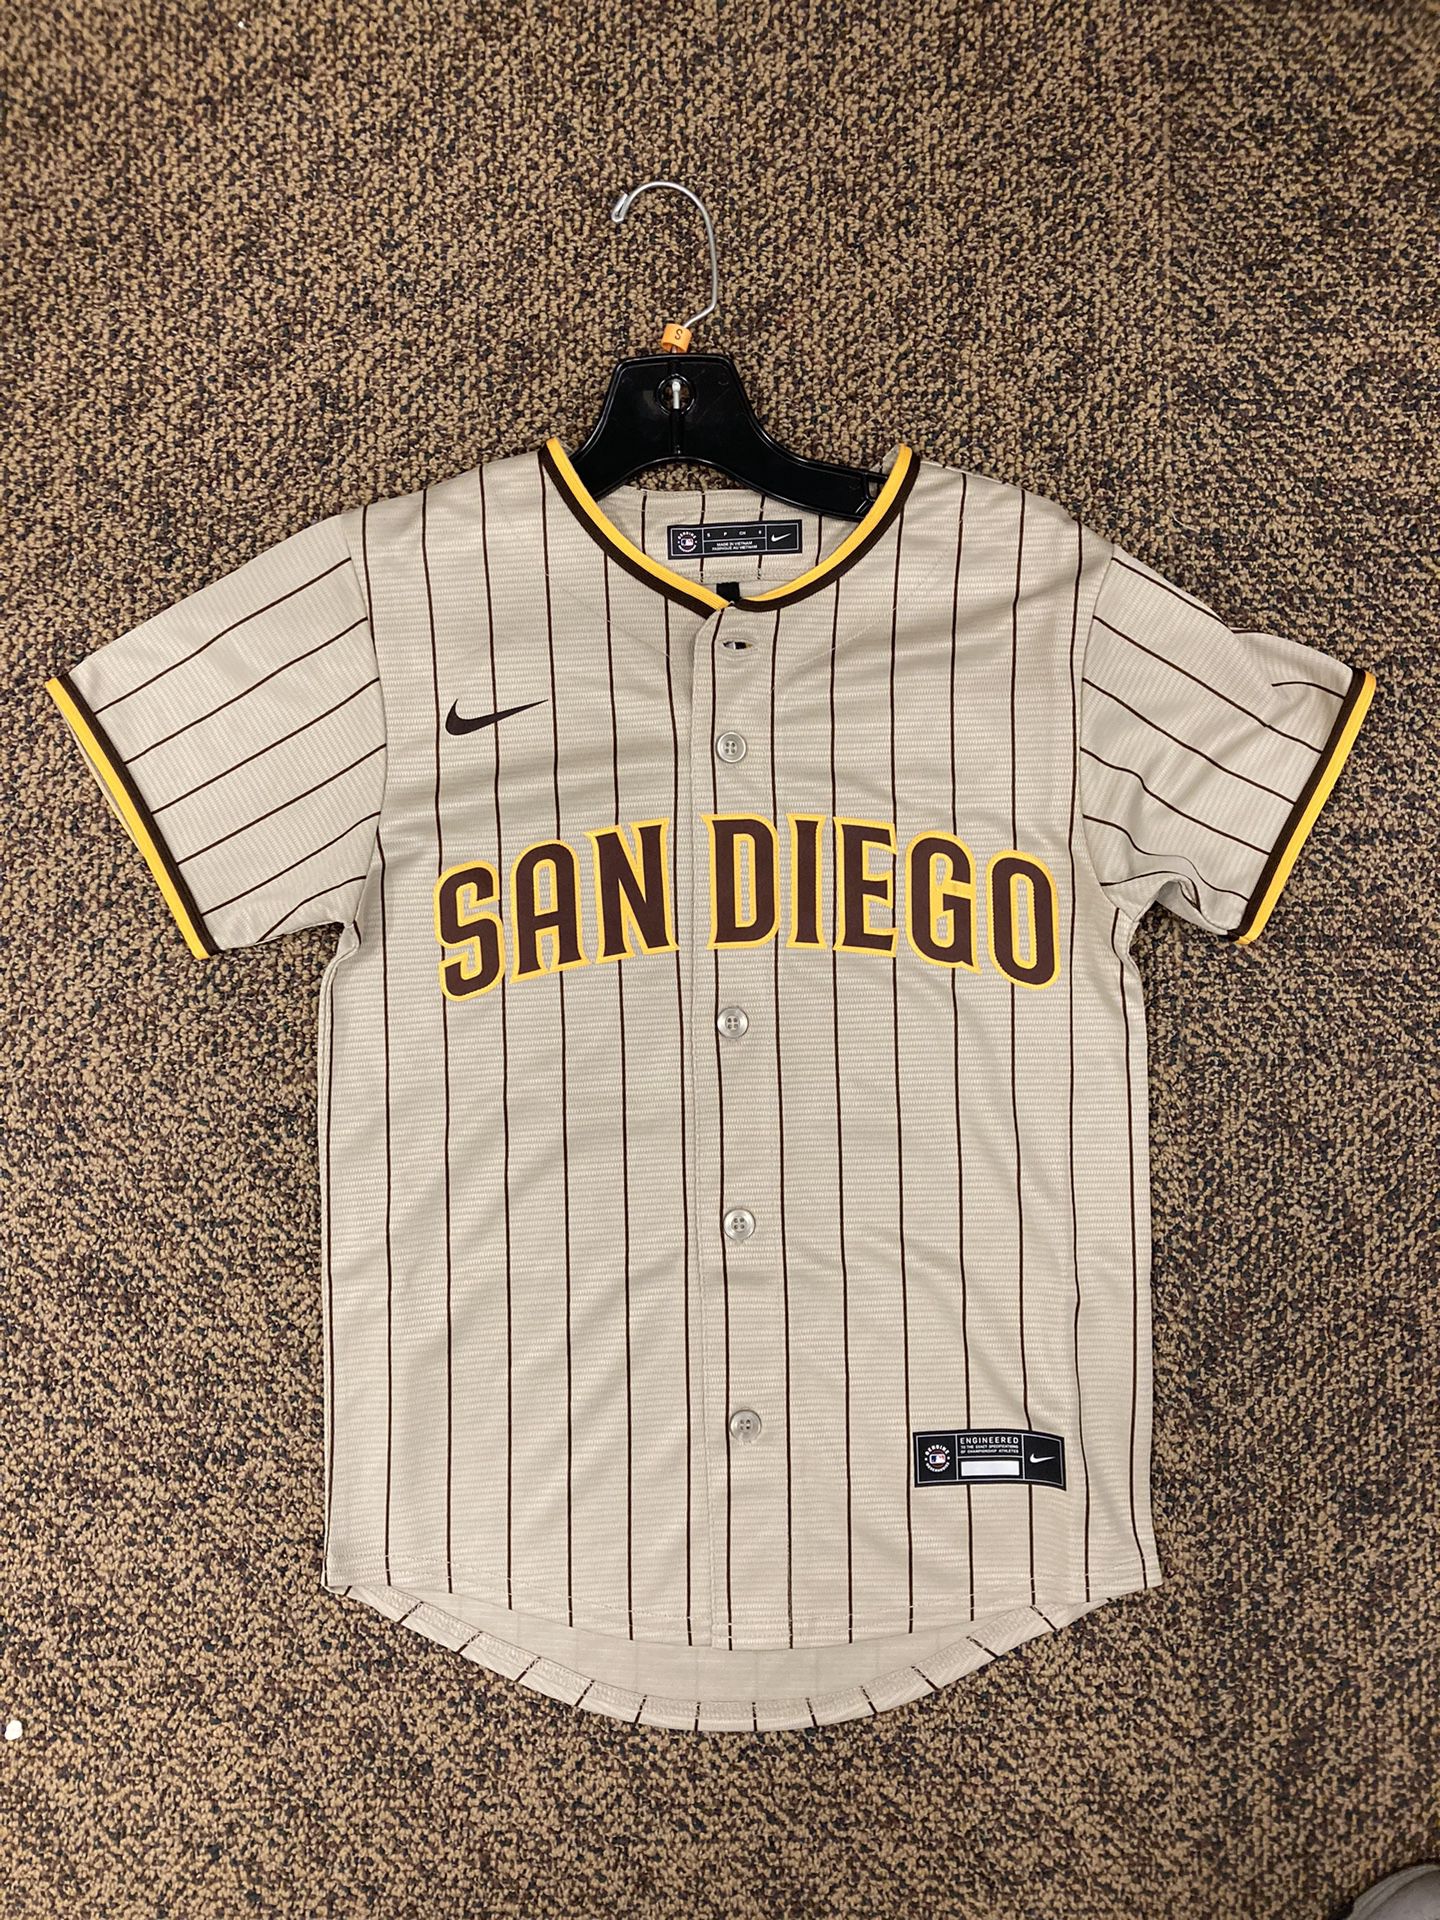 San Diego Padres Kids Nike Baseball Jersey for Sale in Brooklyn Center, MN  - OfferUp